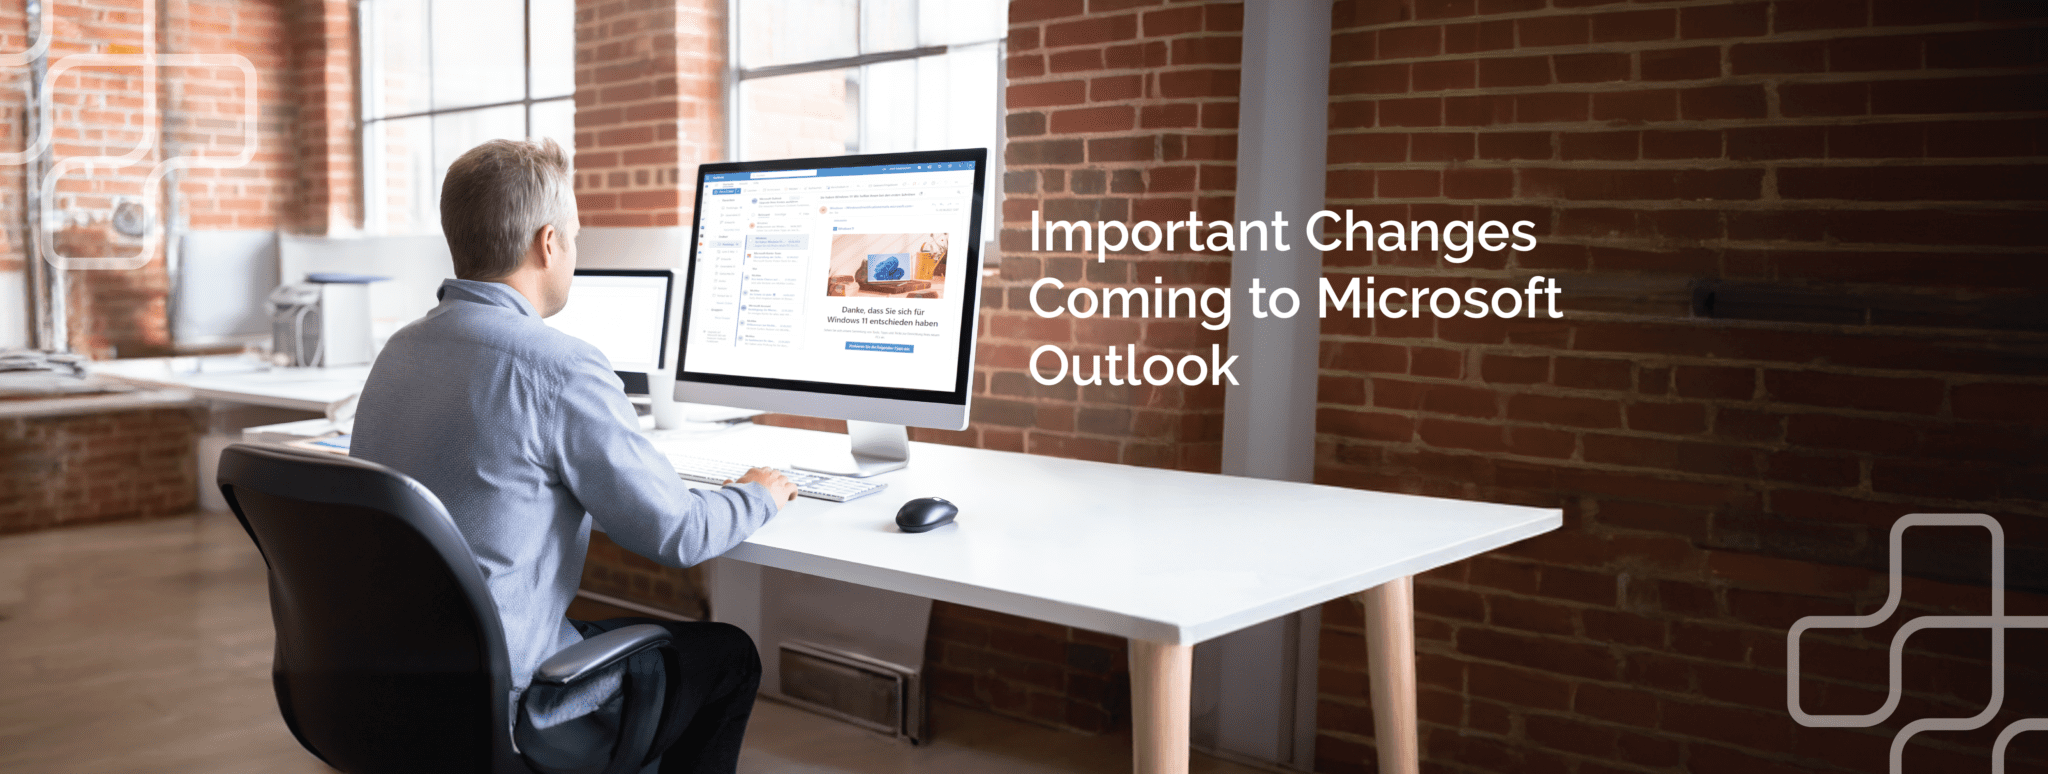 Microsoft Outlook Changes Blog Post